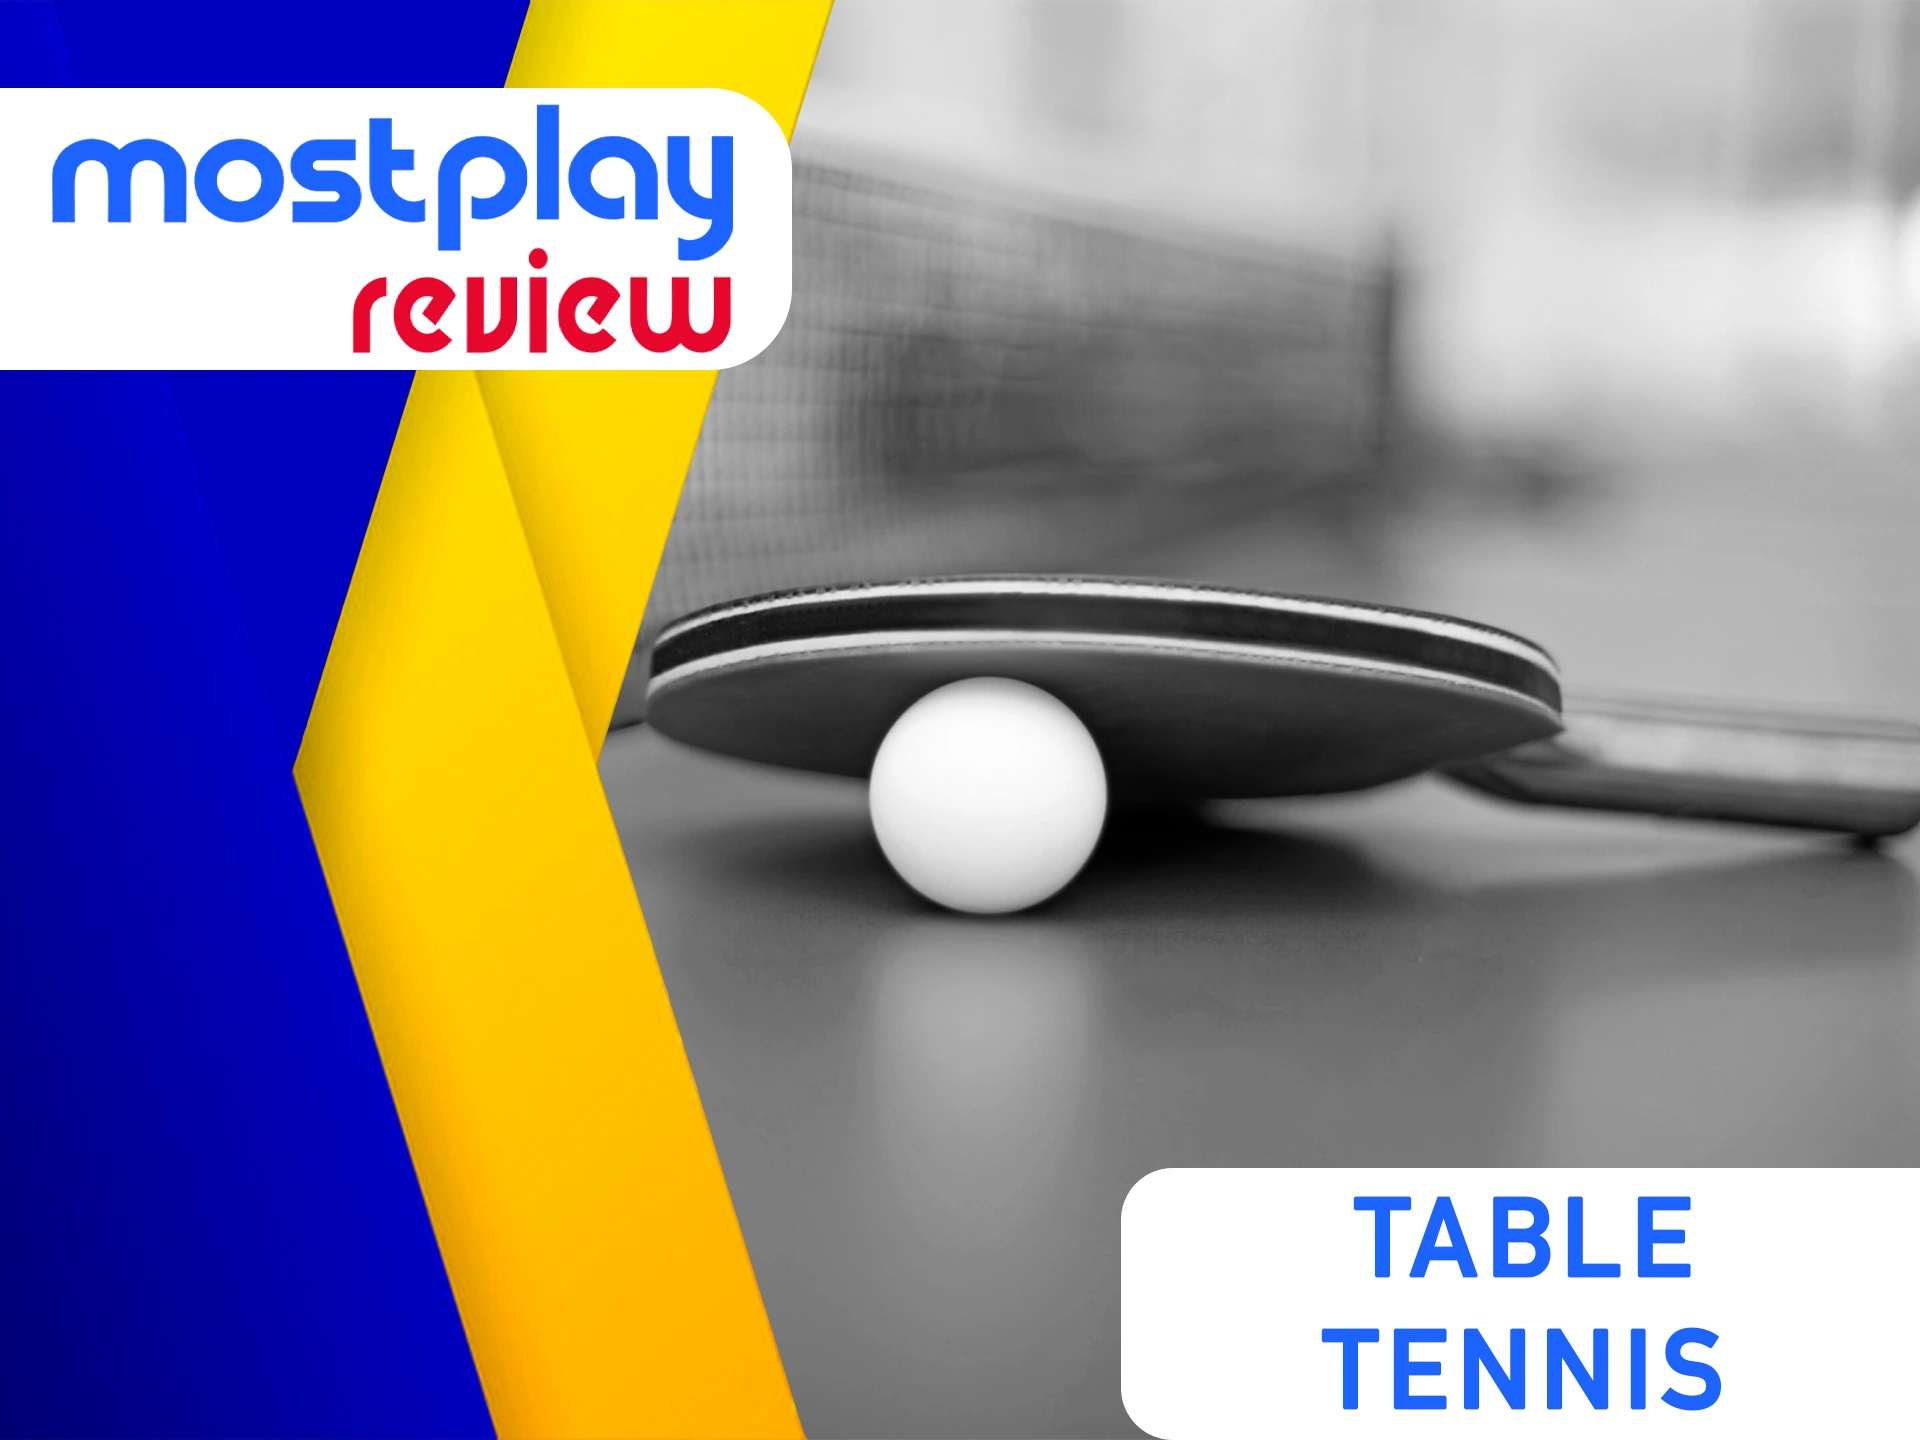 Bet on most quicker table tennis player at Mostplay.